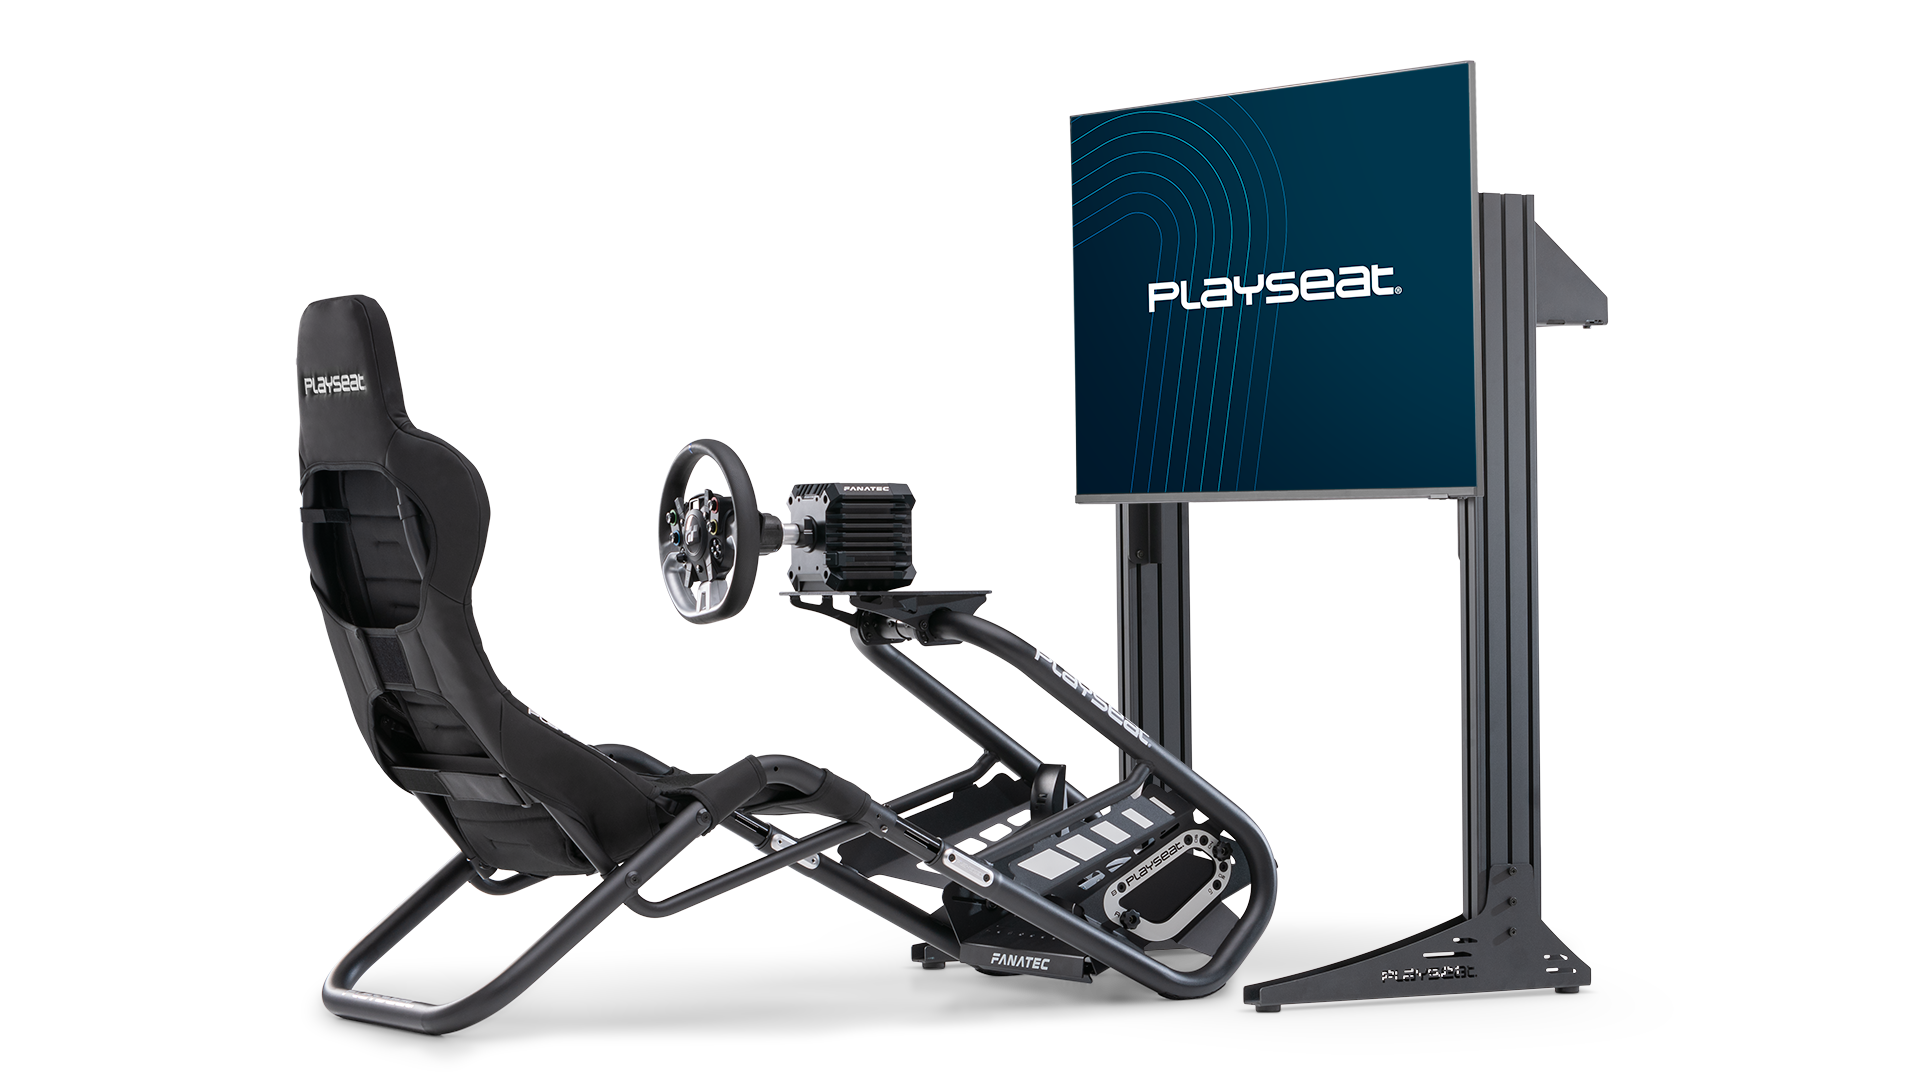 playseat-tv-stand-xl-single-with-playseat-trophy-black-fanatec-csl-dd-gran-turismo-1920x1080-1.png